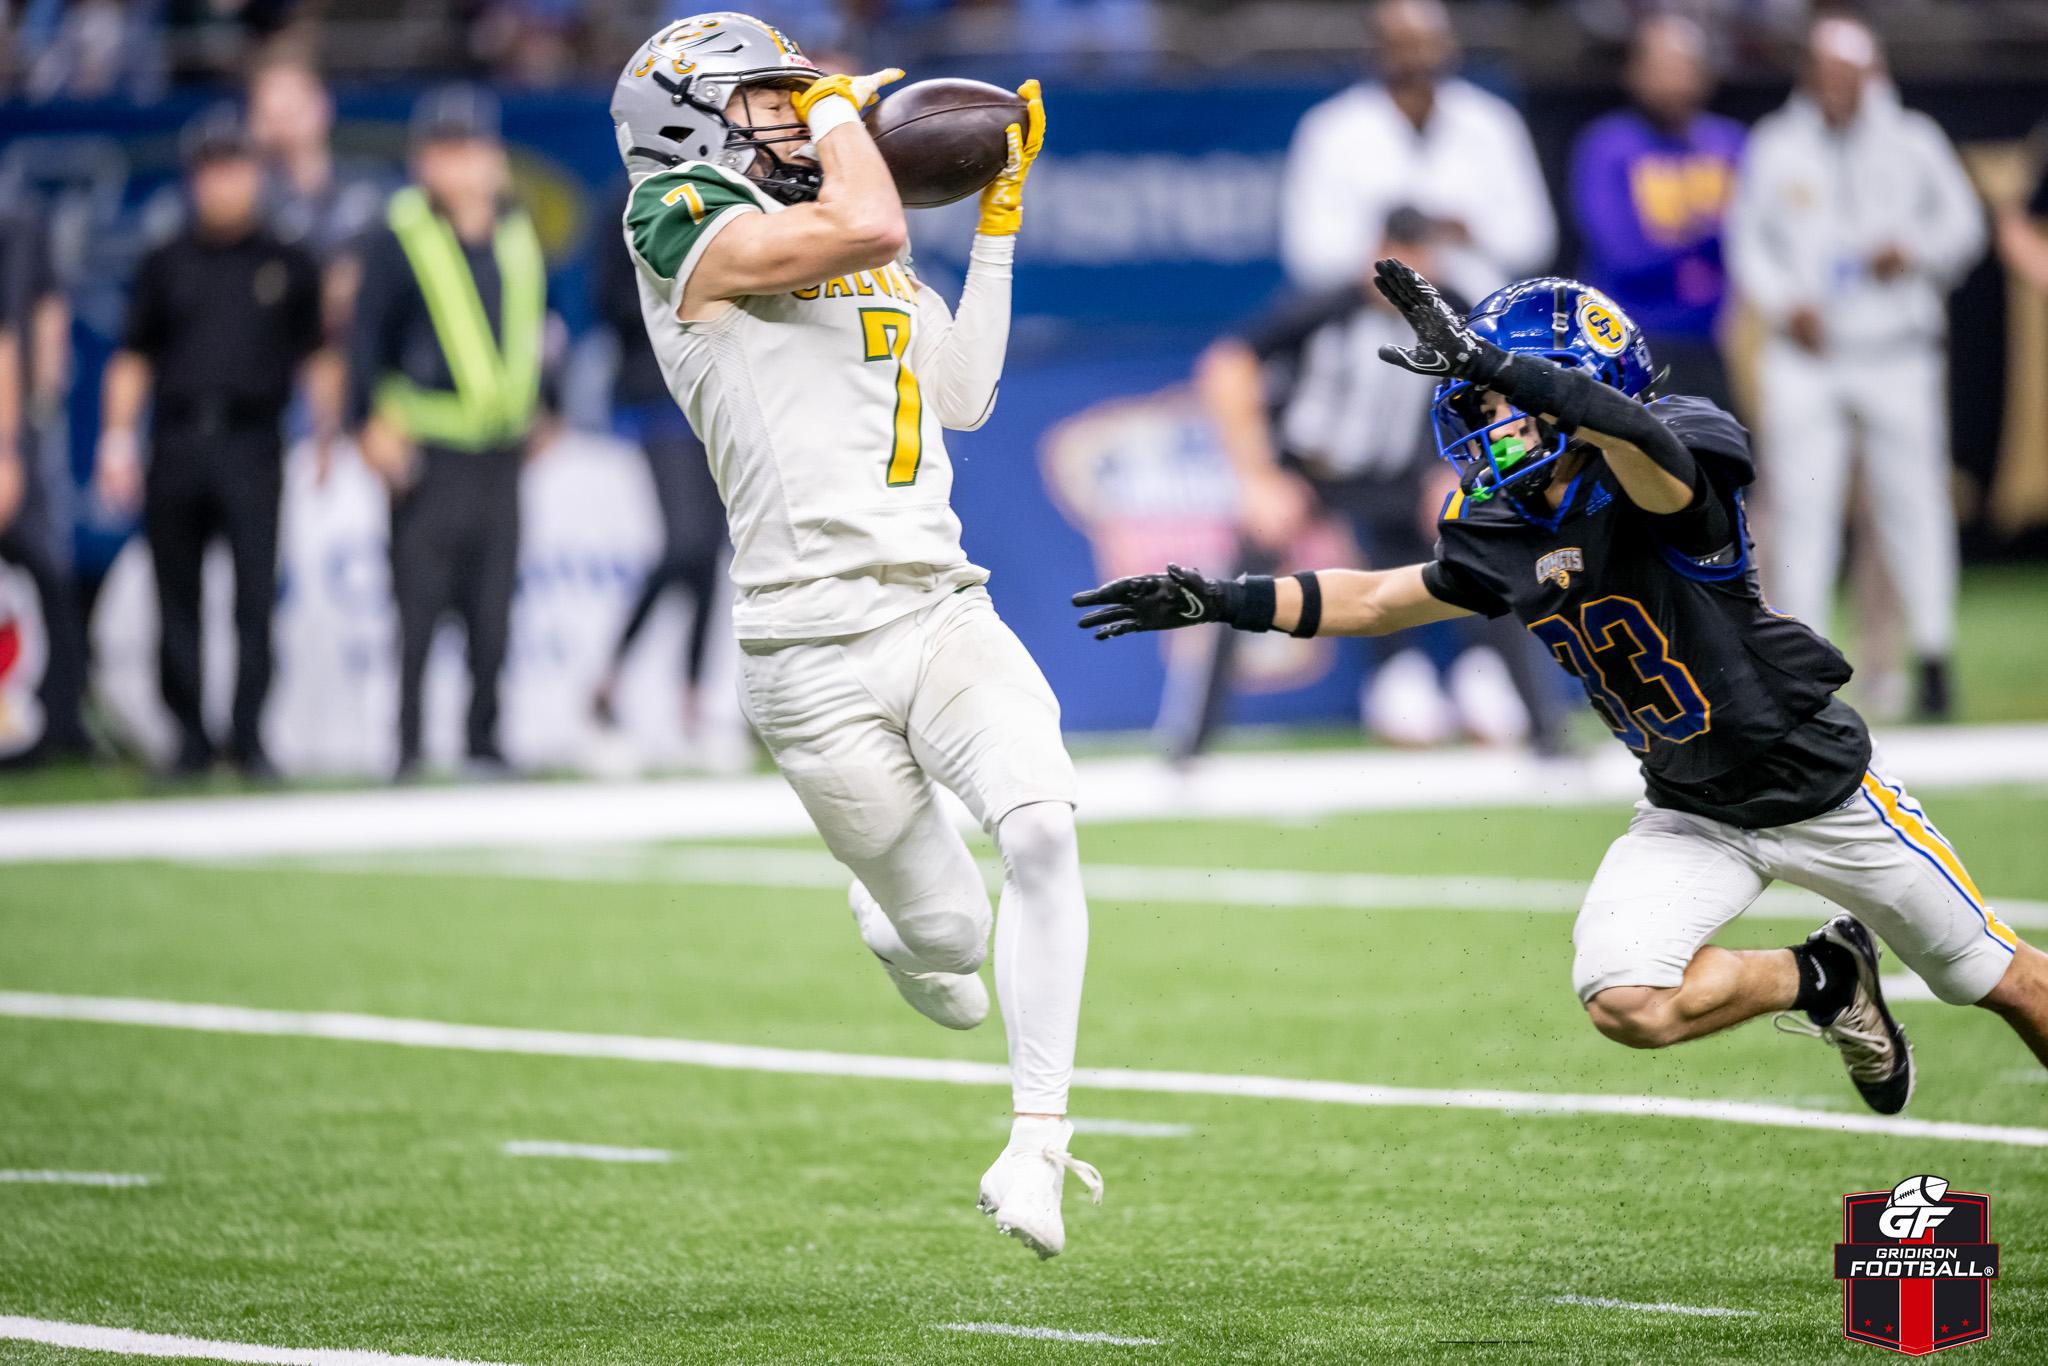 Calvary Baptist Scores Late To Complete Comeback Win Against St. Charles Catholic To Win Division III (Select) State Championship 34-28